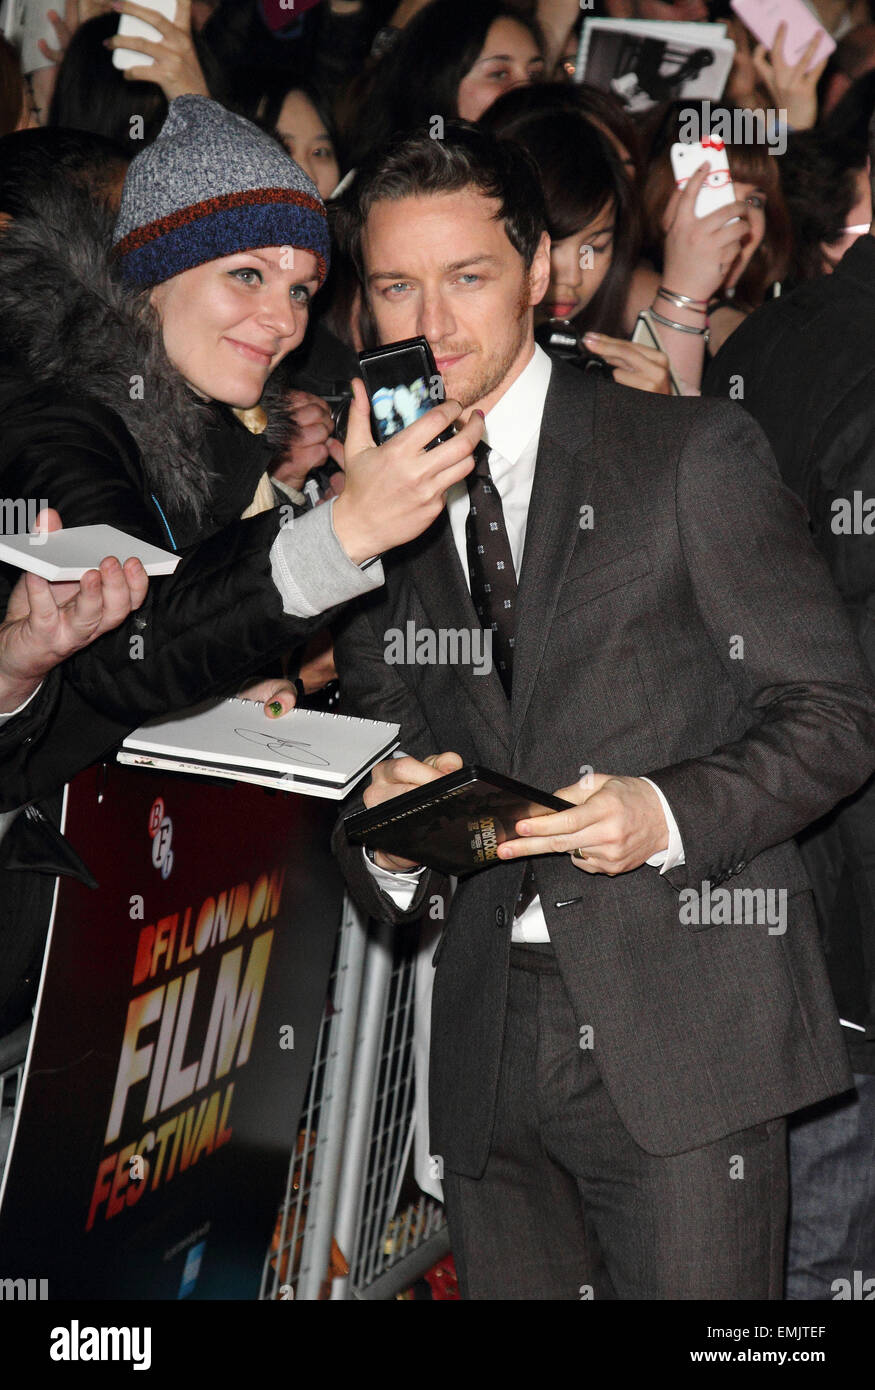 BFI London Film Festival - 'The Disappearance of Eleanor Rigby' - Official screening at the Odeon West End  Featuring: James McAvoy Where: London, United Kingdom When: 17 Oct 2014 Stock Photo